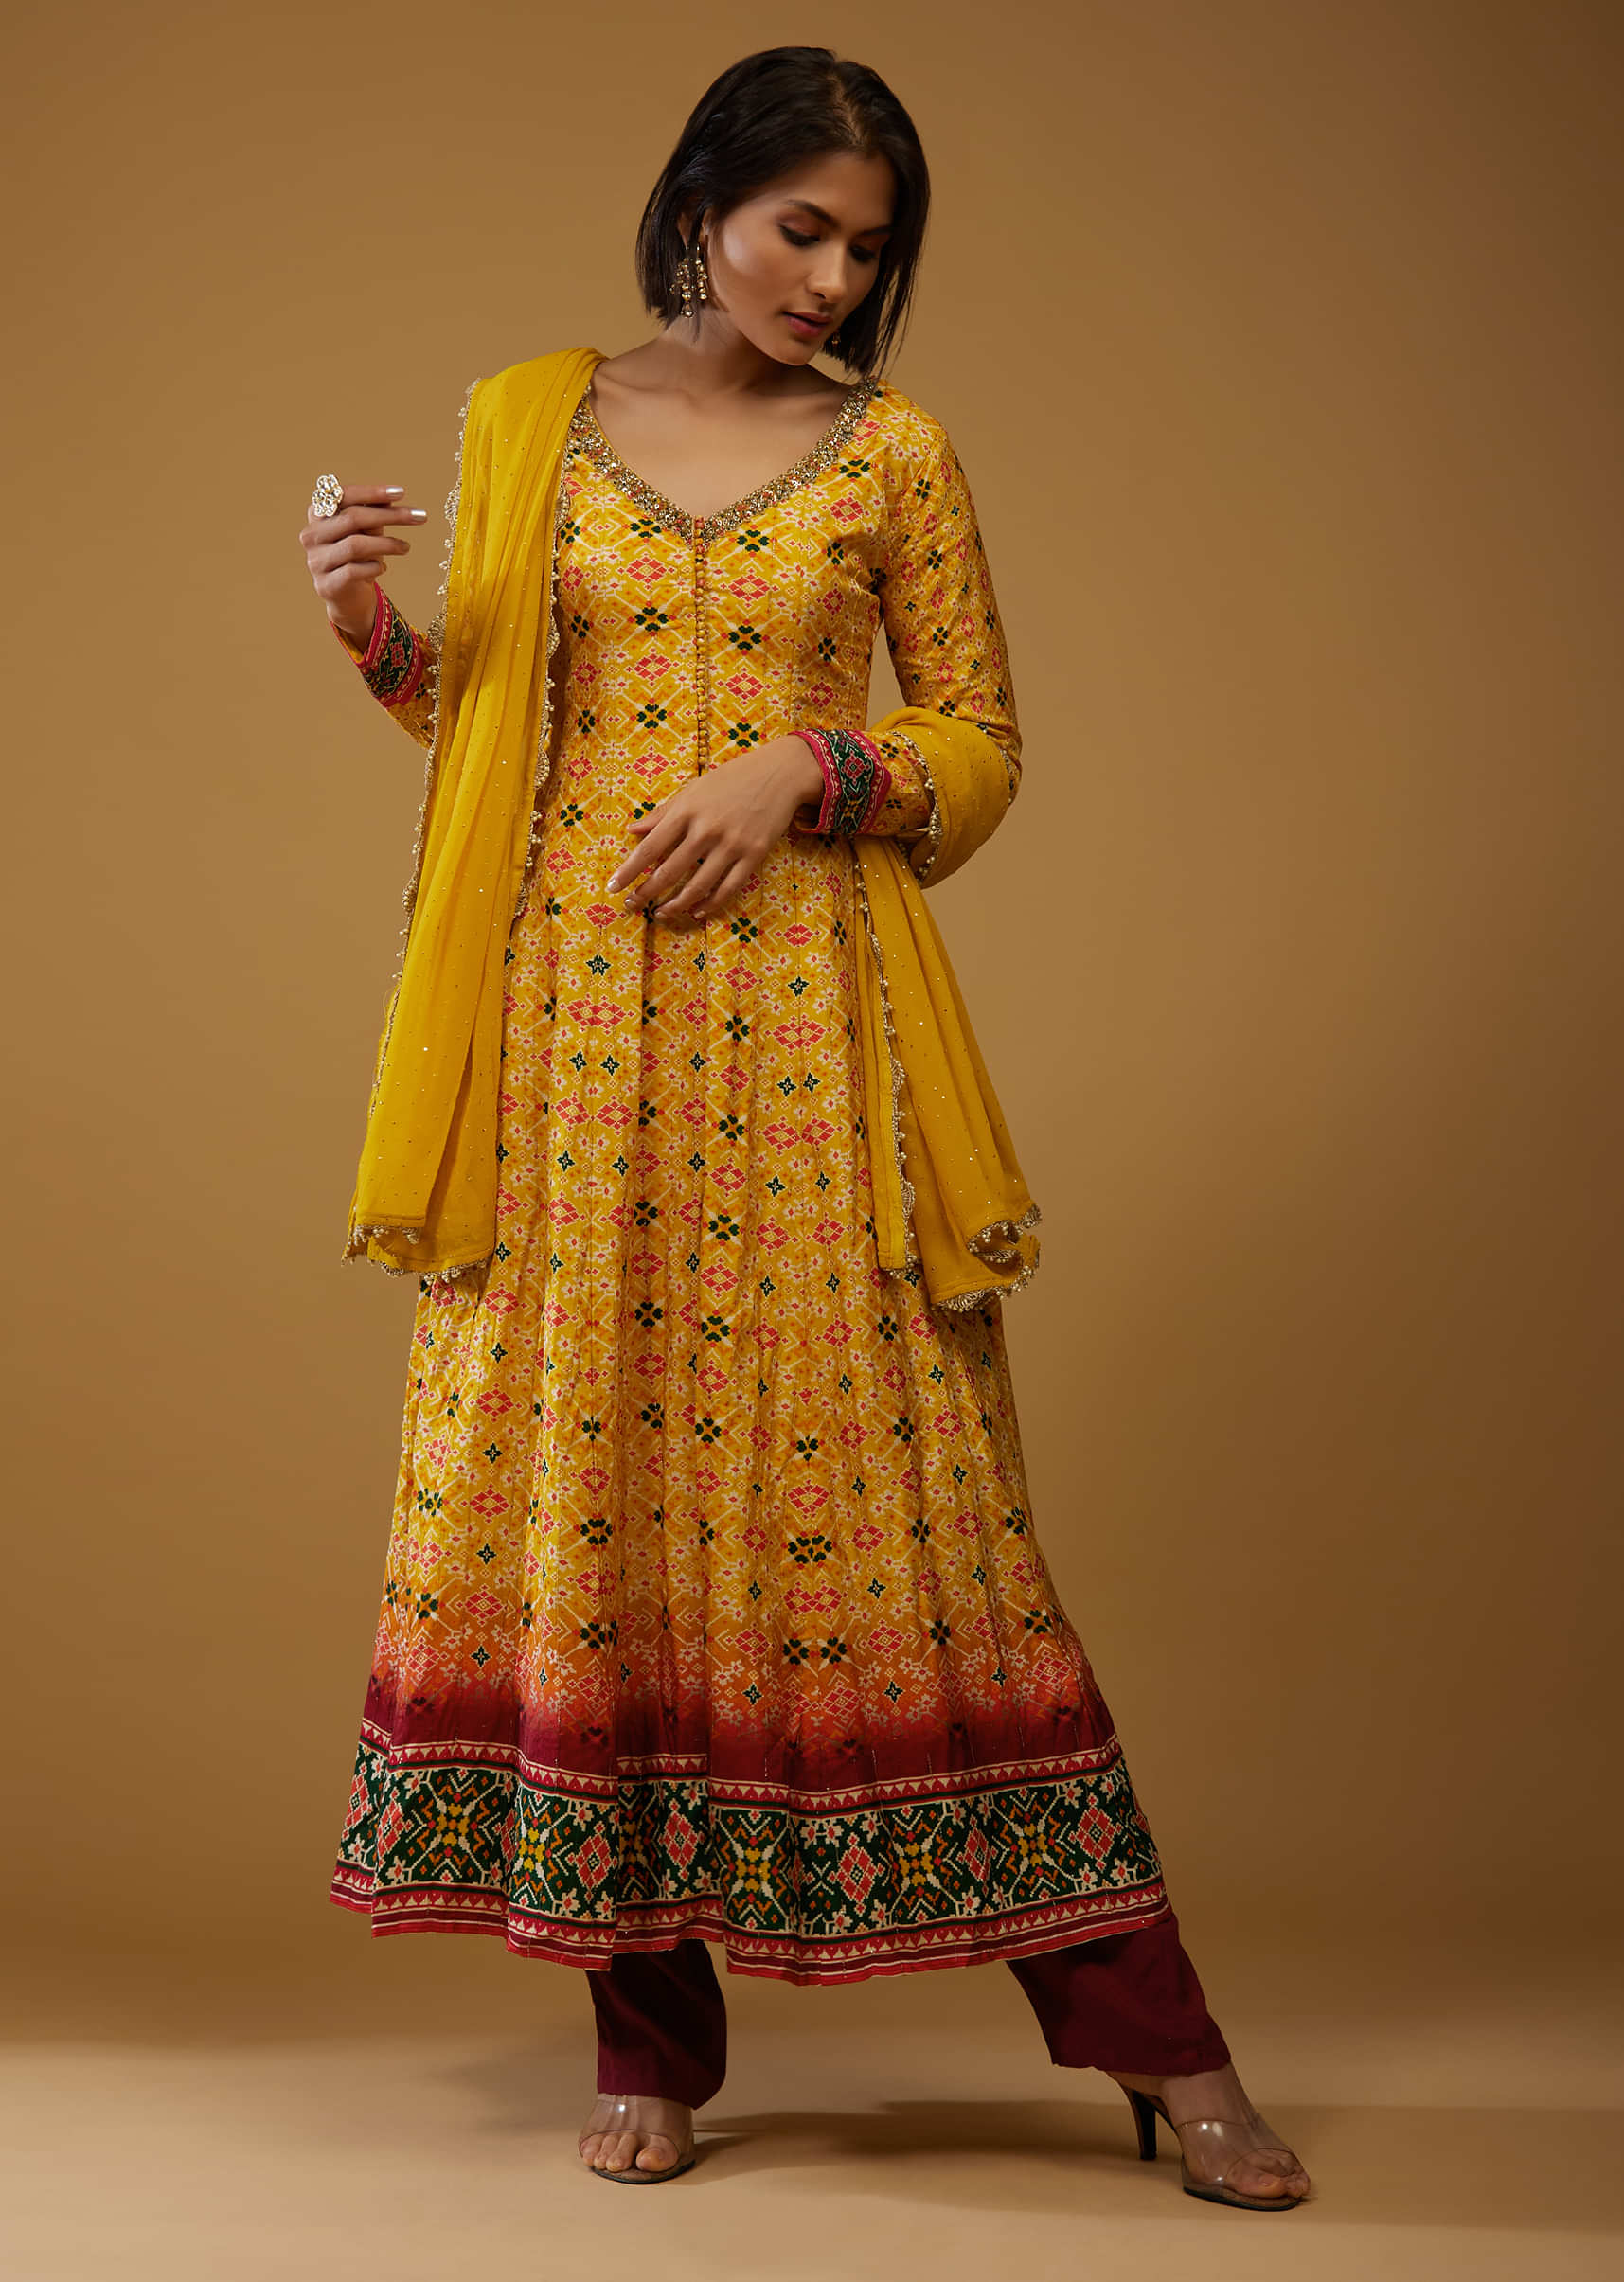 Canary Yellow Anarkali Suit With Bandhani Print And Embroidery